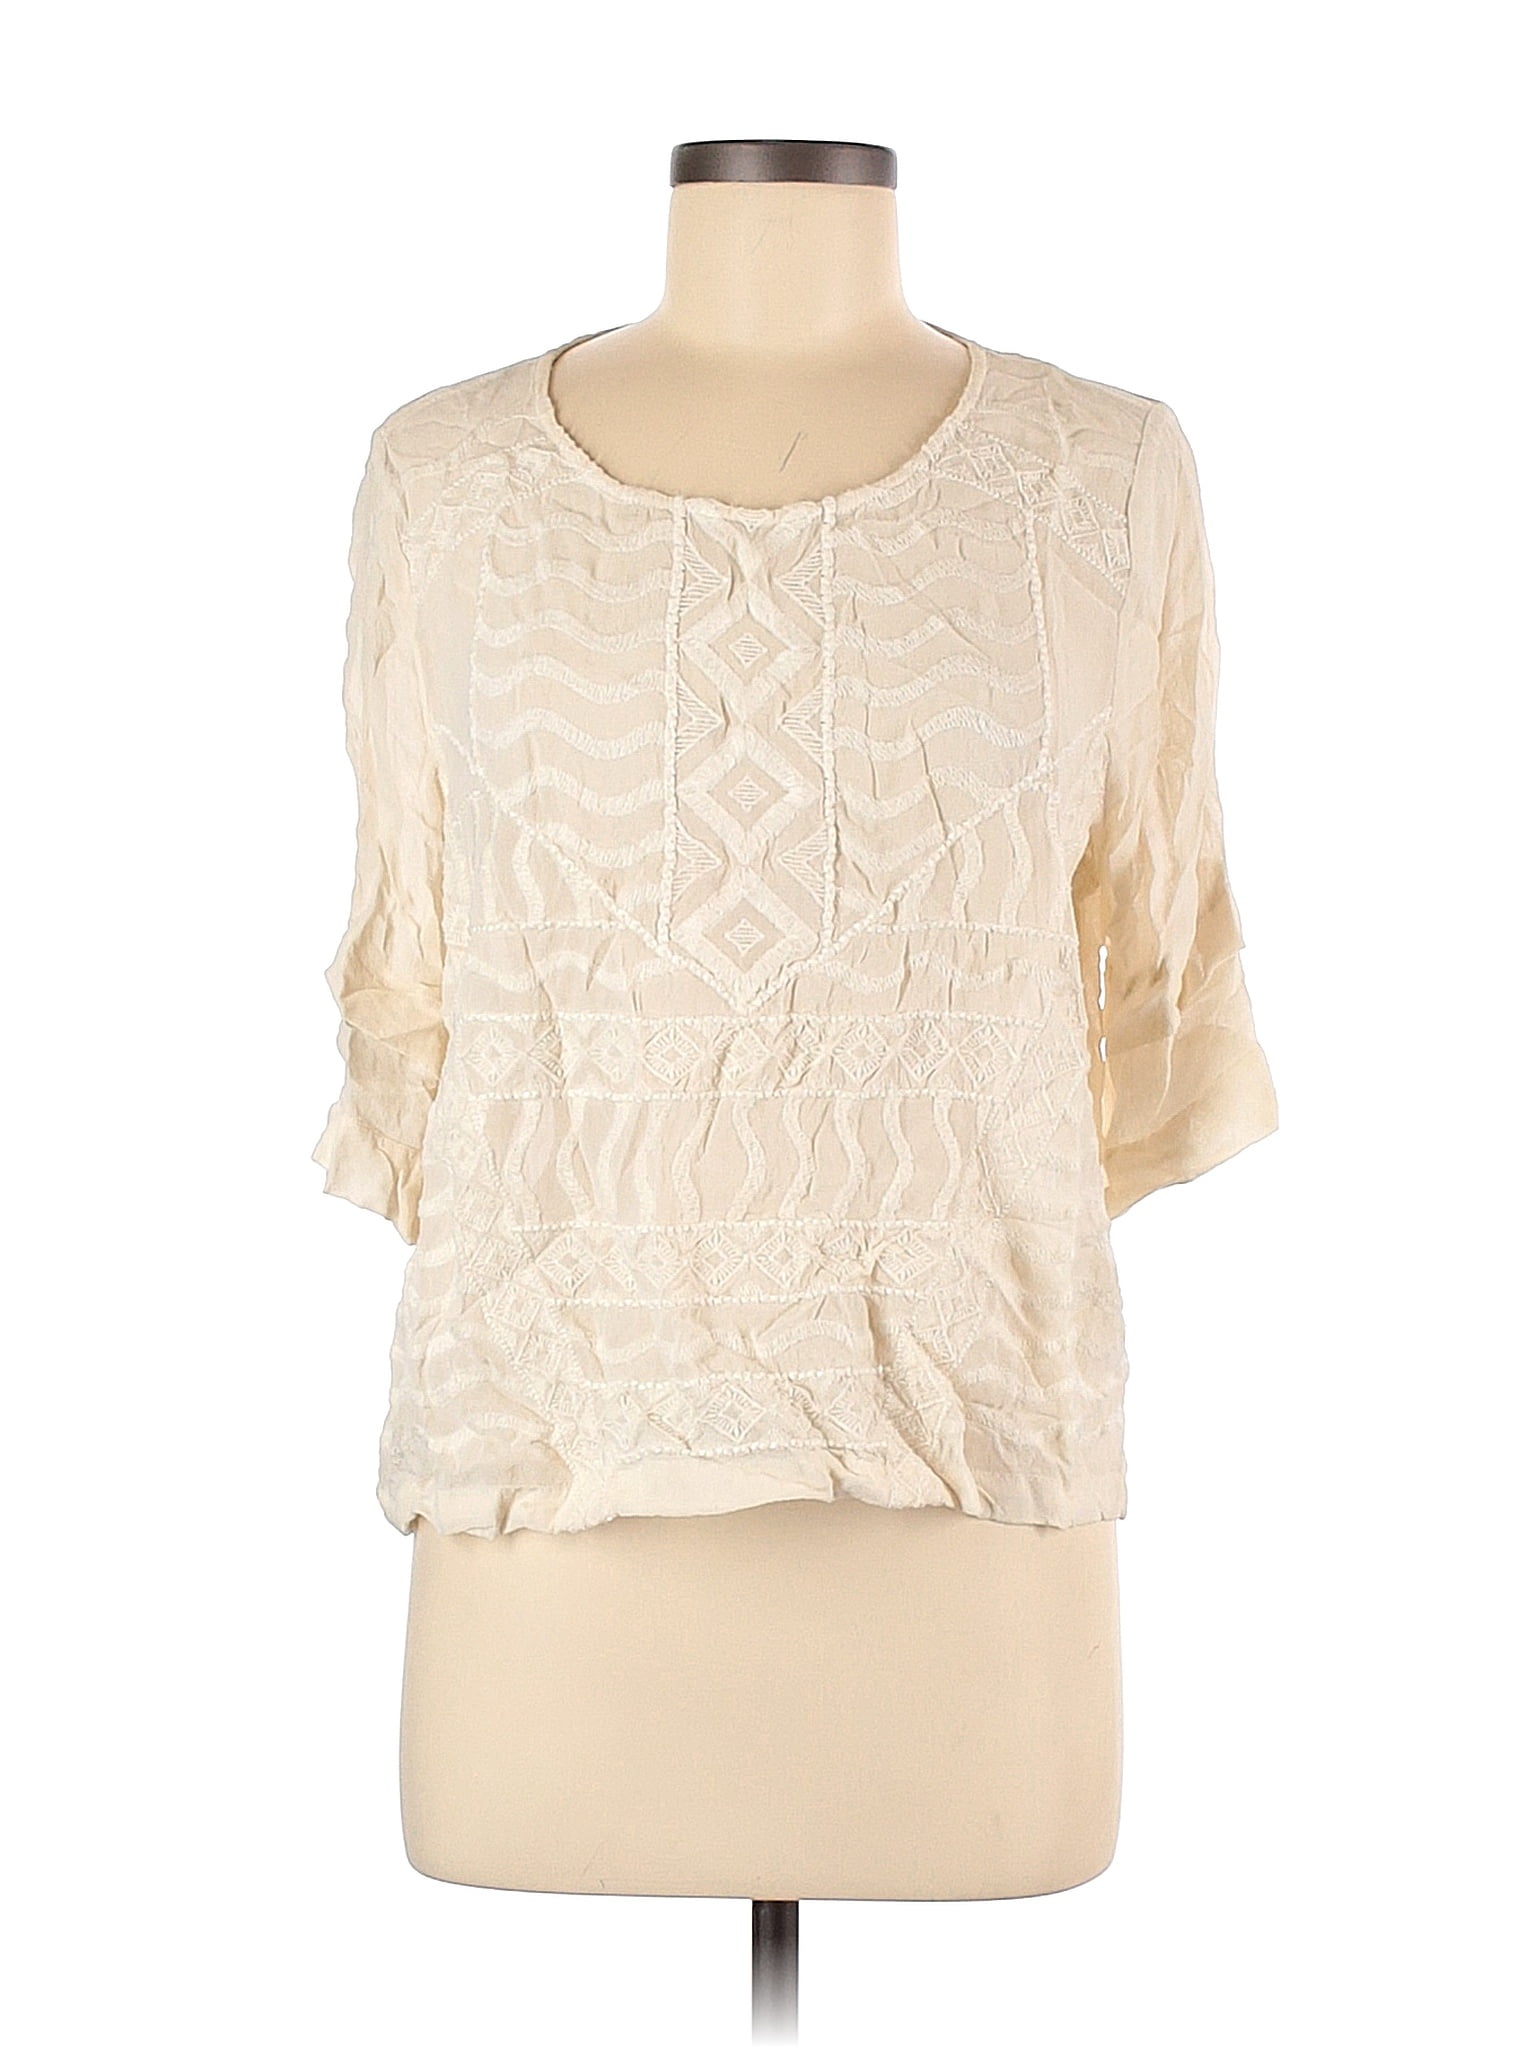 Lucky Brand Ivory 3/4 Sleeve Blouse Size M - 70% off | thredUP